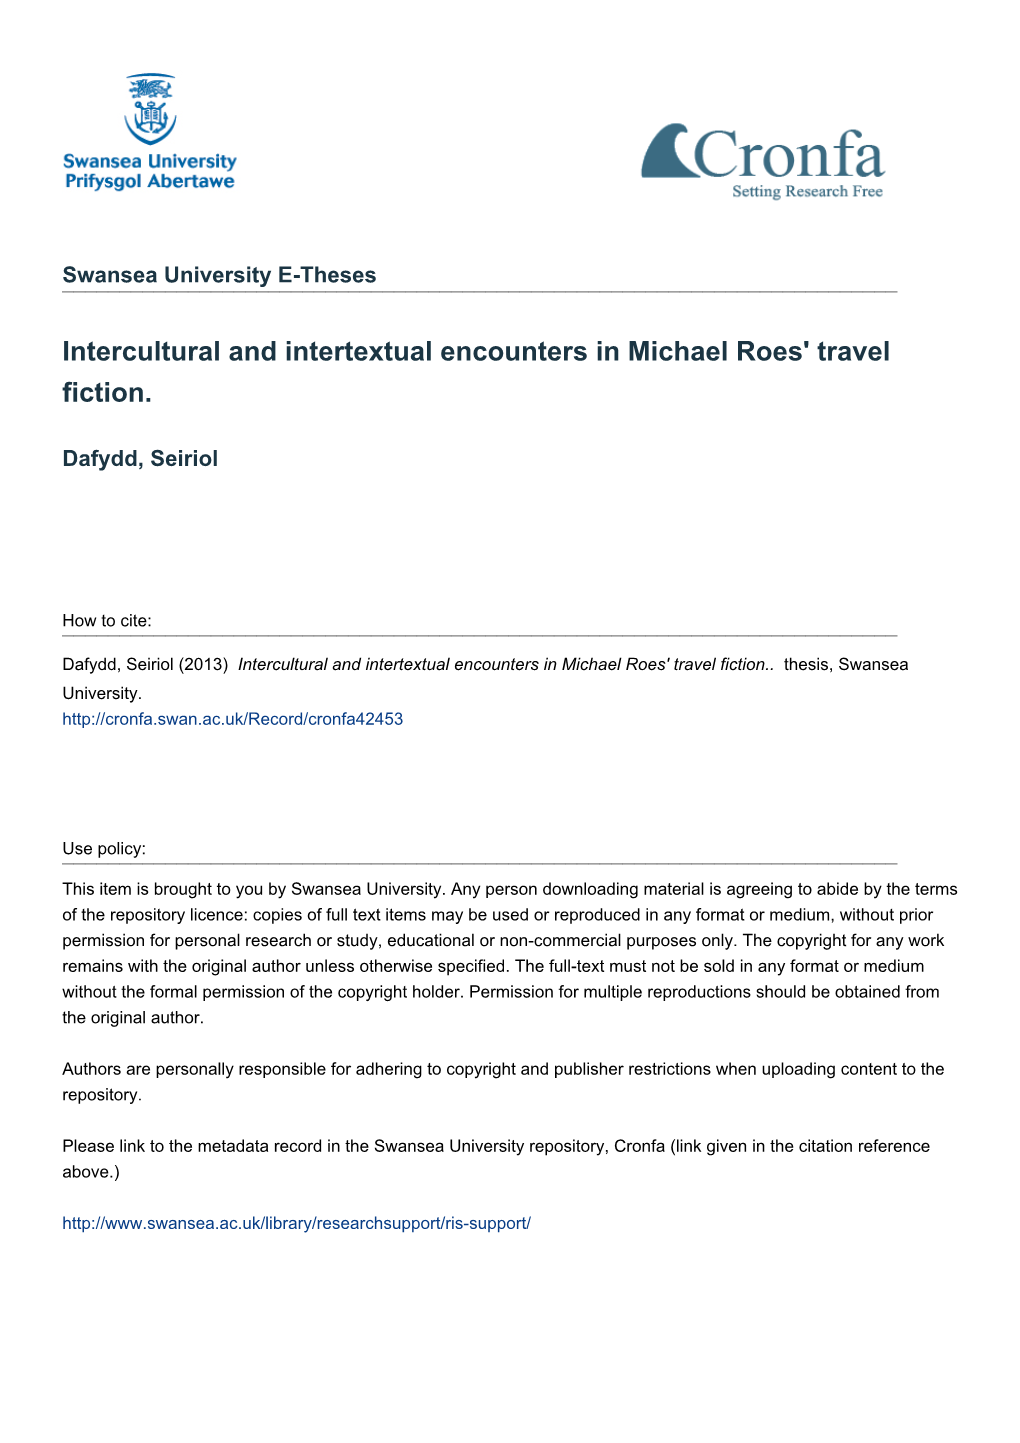 Intercultural and Intertextual Encounters in Michael Roes' Travel Fiction